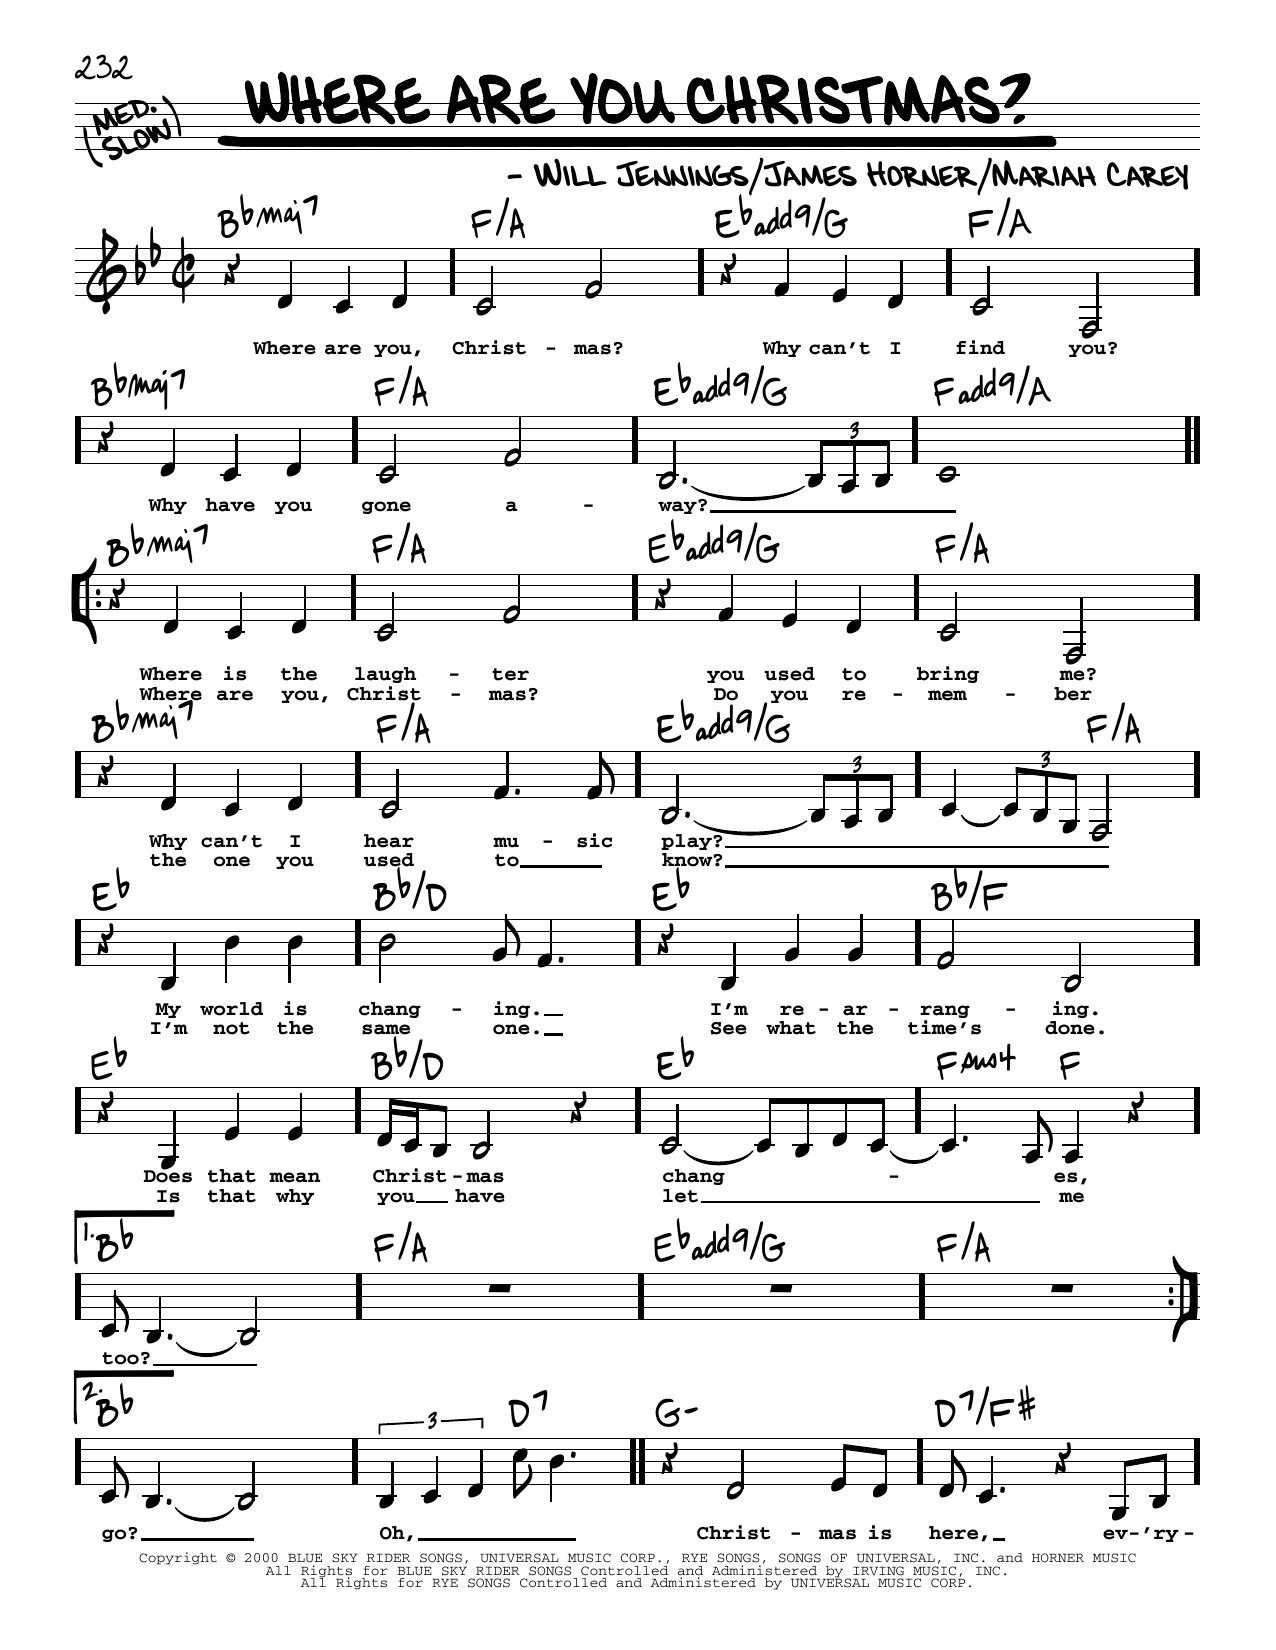 Download Faith Hill Where Are You Christmas? (from How The Sheet Music